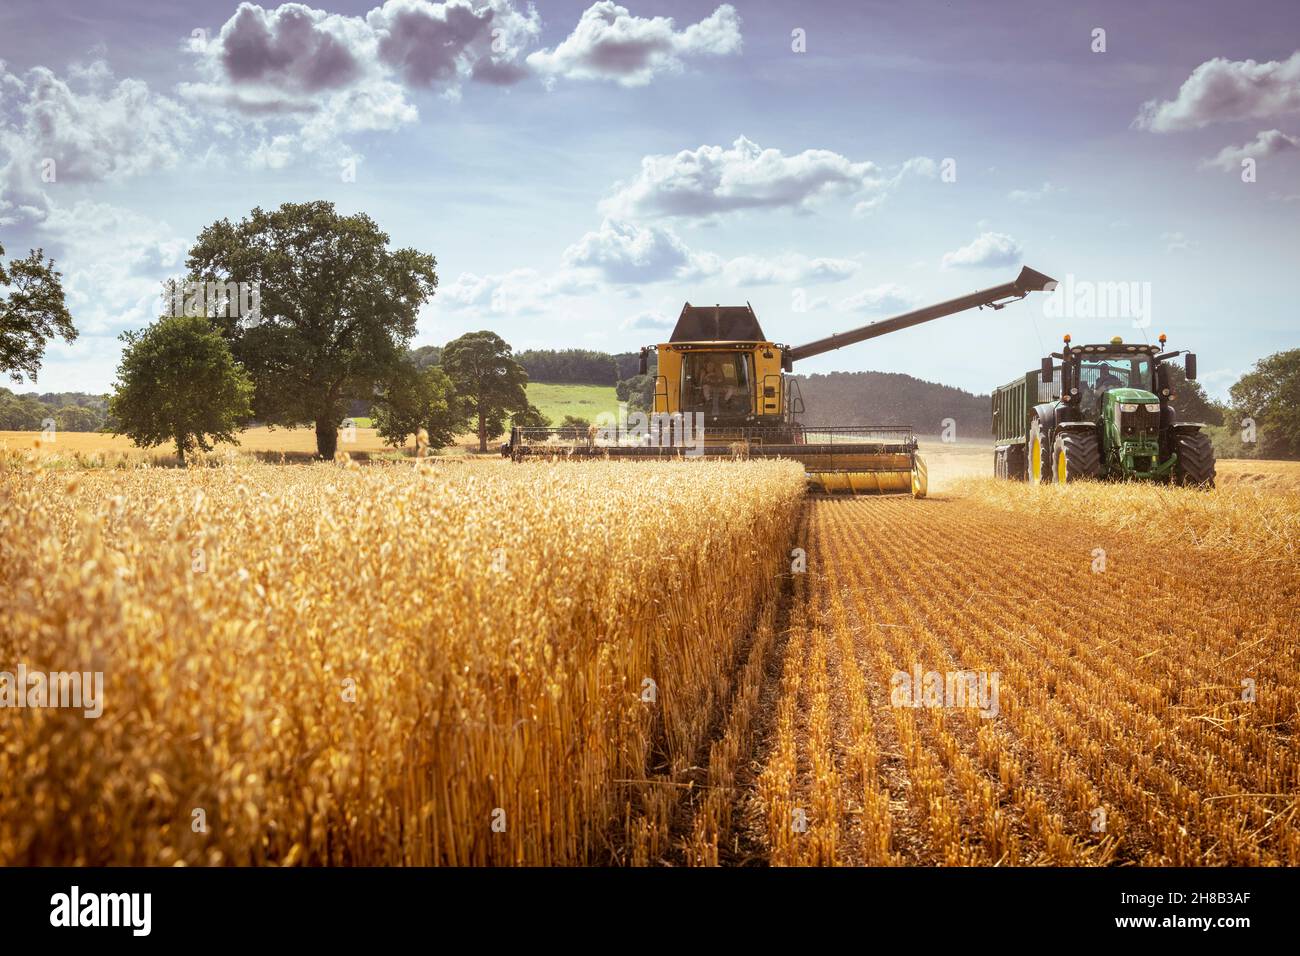 Combine harvester and tractor in oat field Stock Photo